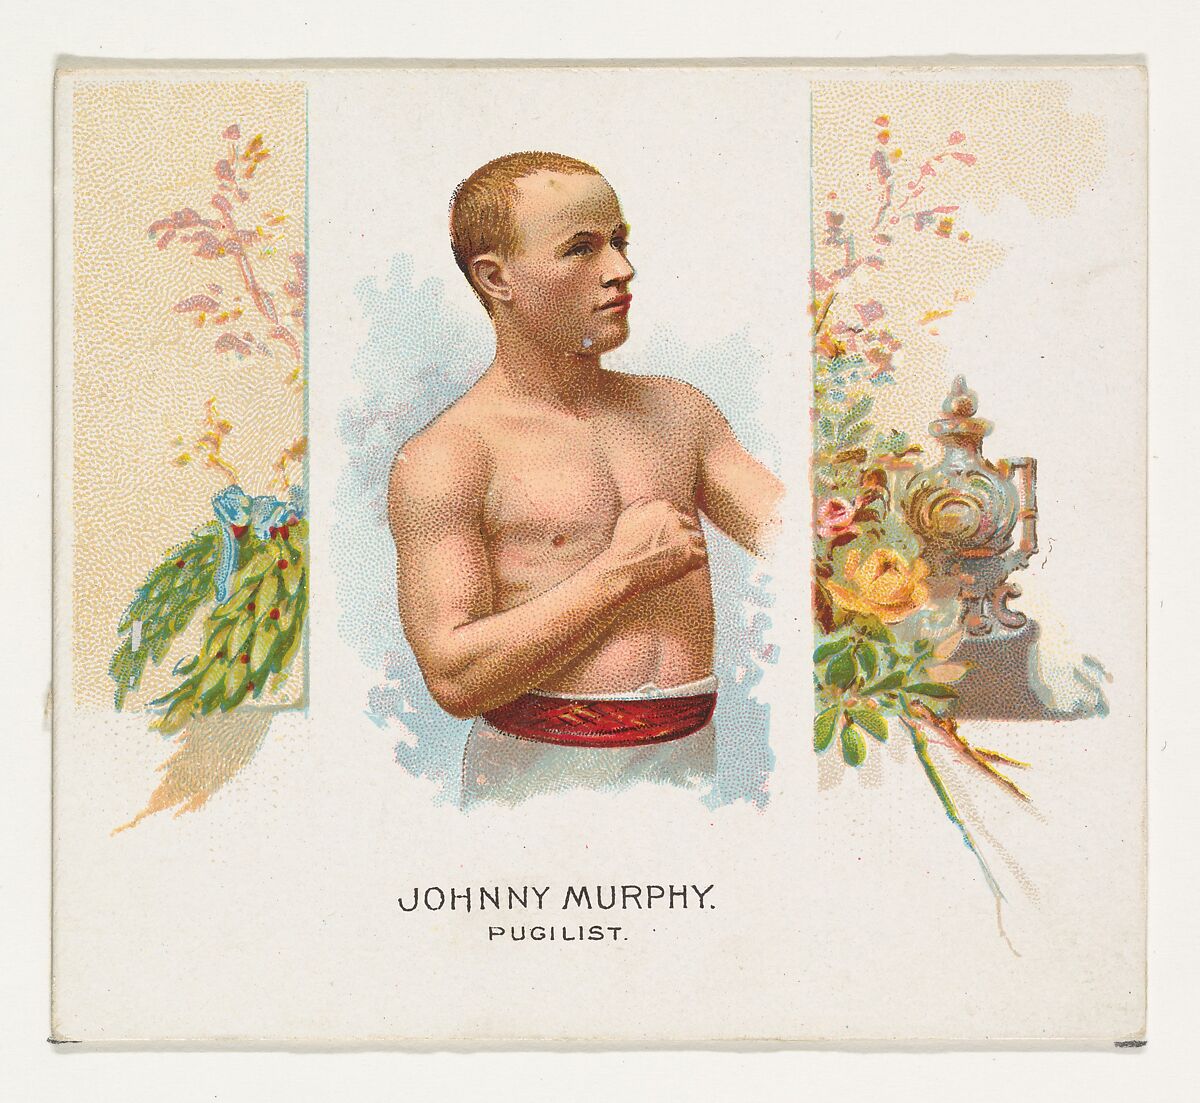 Johnny Murphy, Pugilist, from World's Champions, Second Series (N43) for Allen & Ginter Cigarettes, Allen &amp; Ginter (American, Richmond, Virginia), Commercial lithograph 